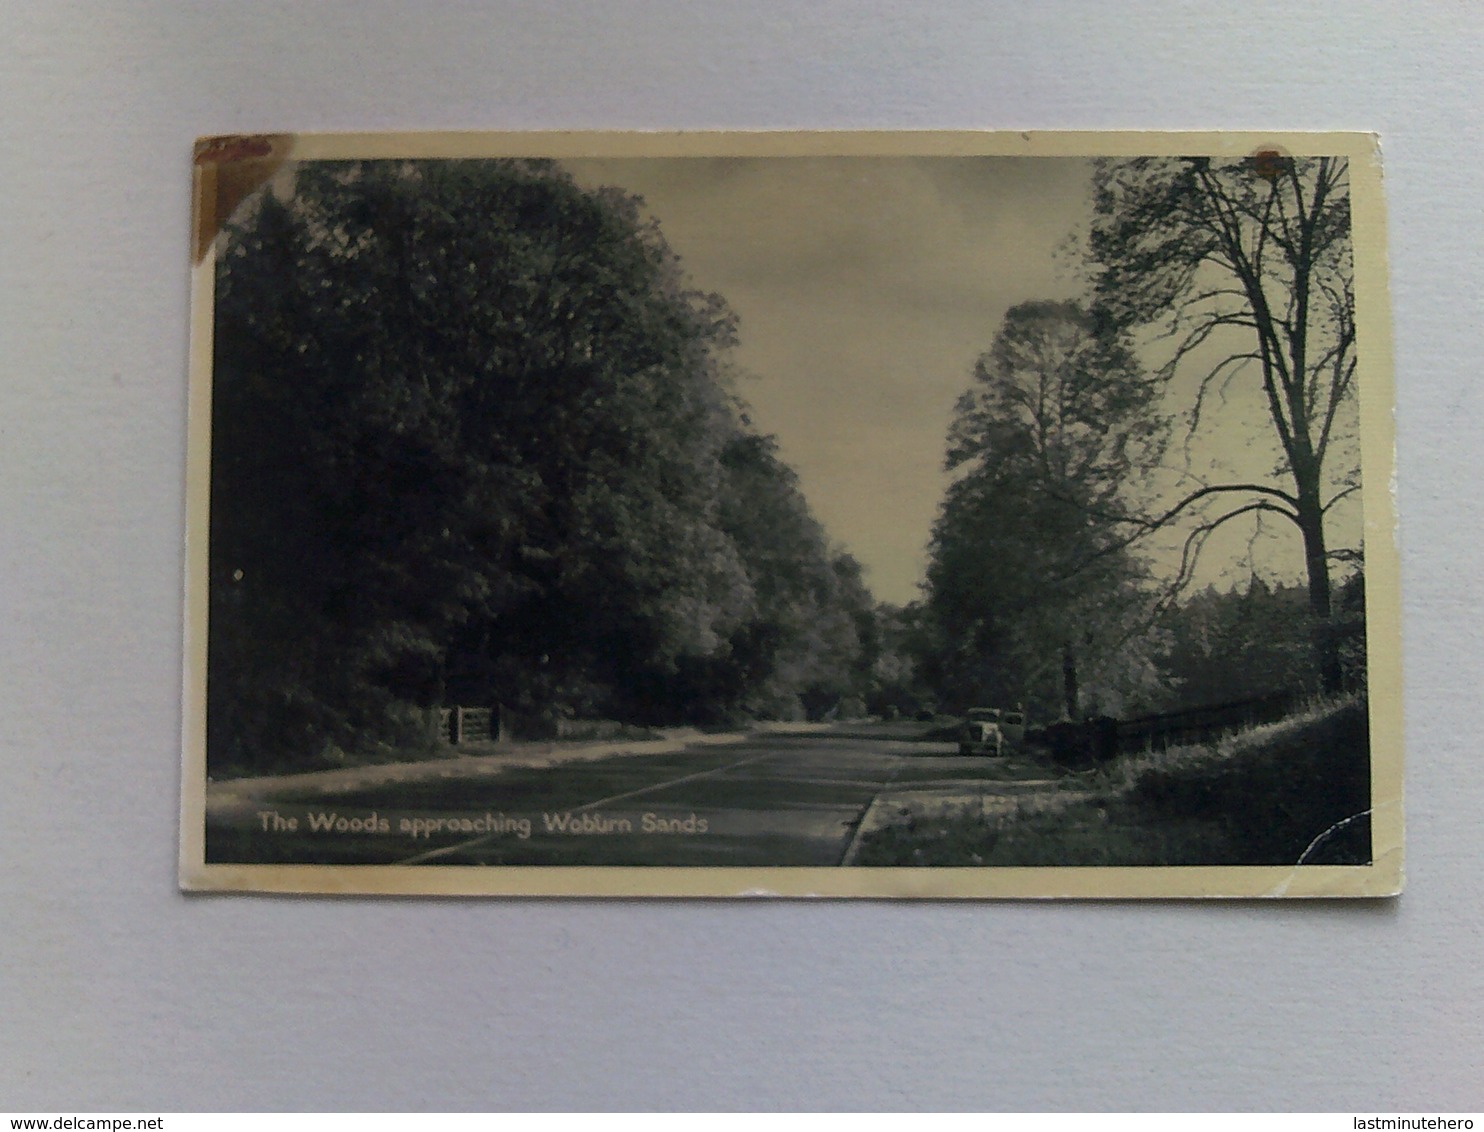 1957 Black And White  Postcard - The Woods Approaching Woburn Sands - Buckinghamshire